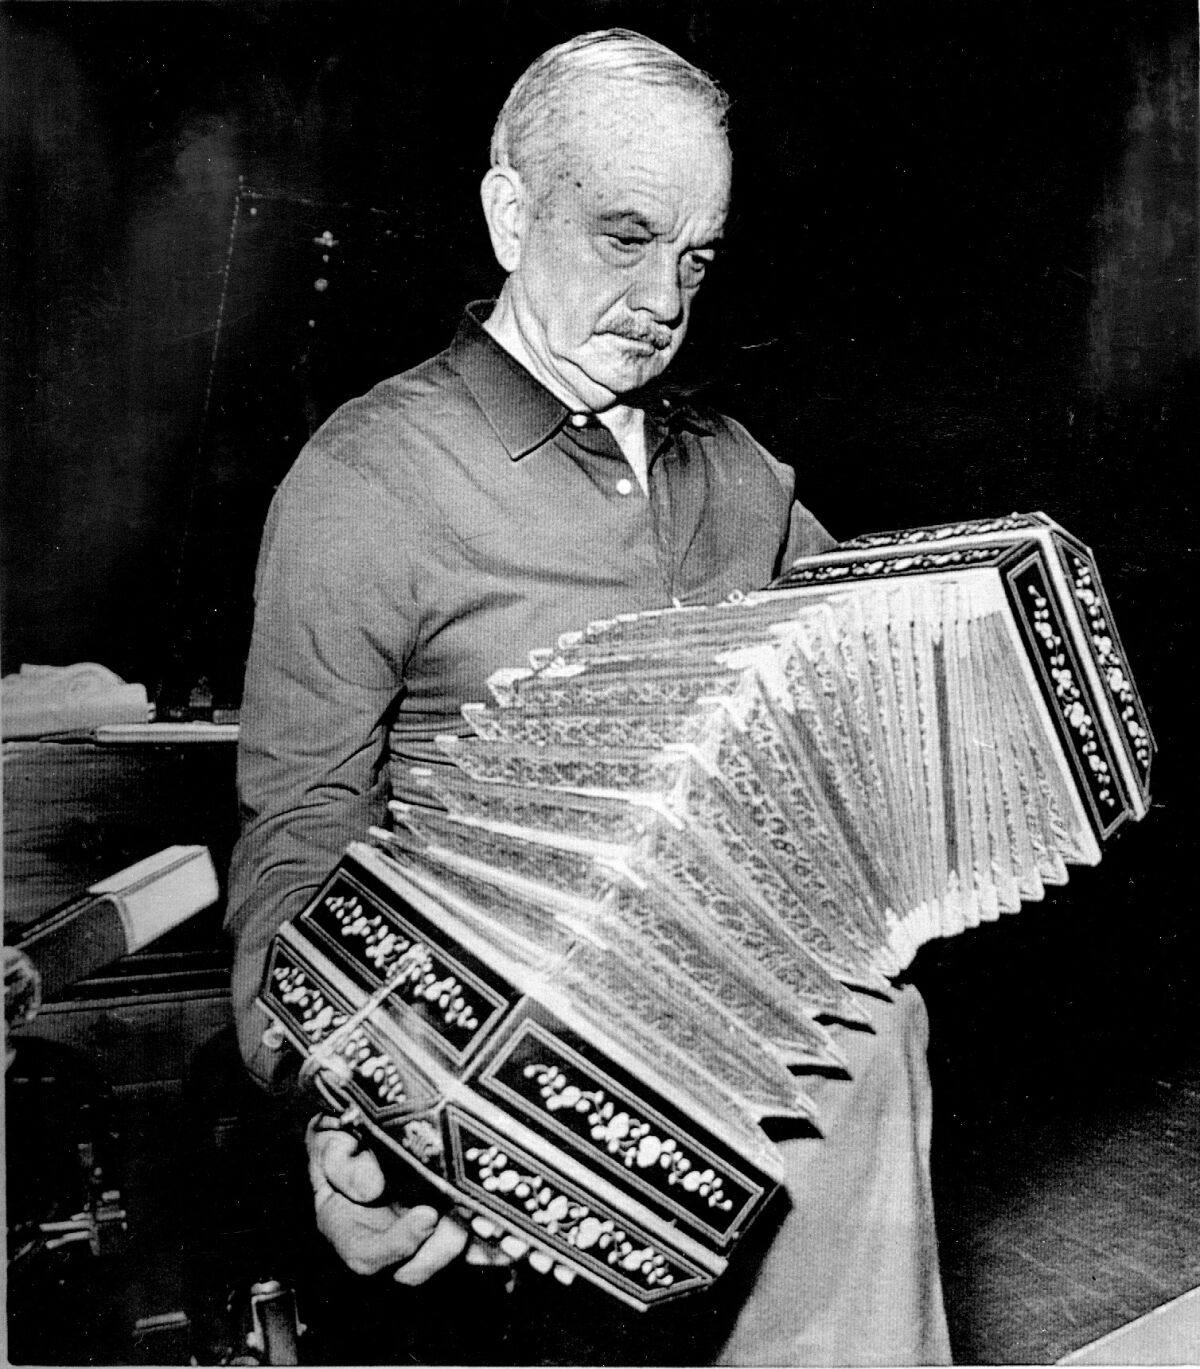 Astor Piazzolla plays the bandoneón.